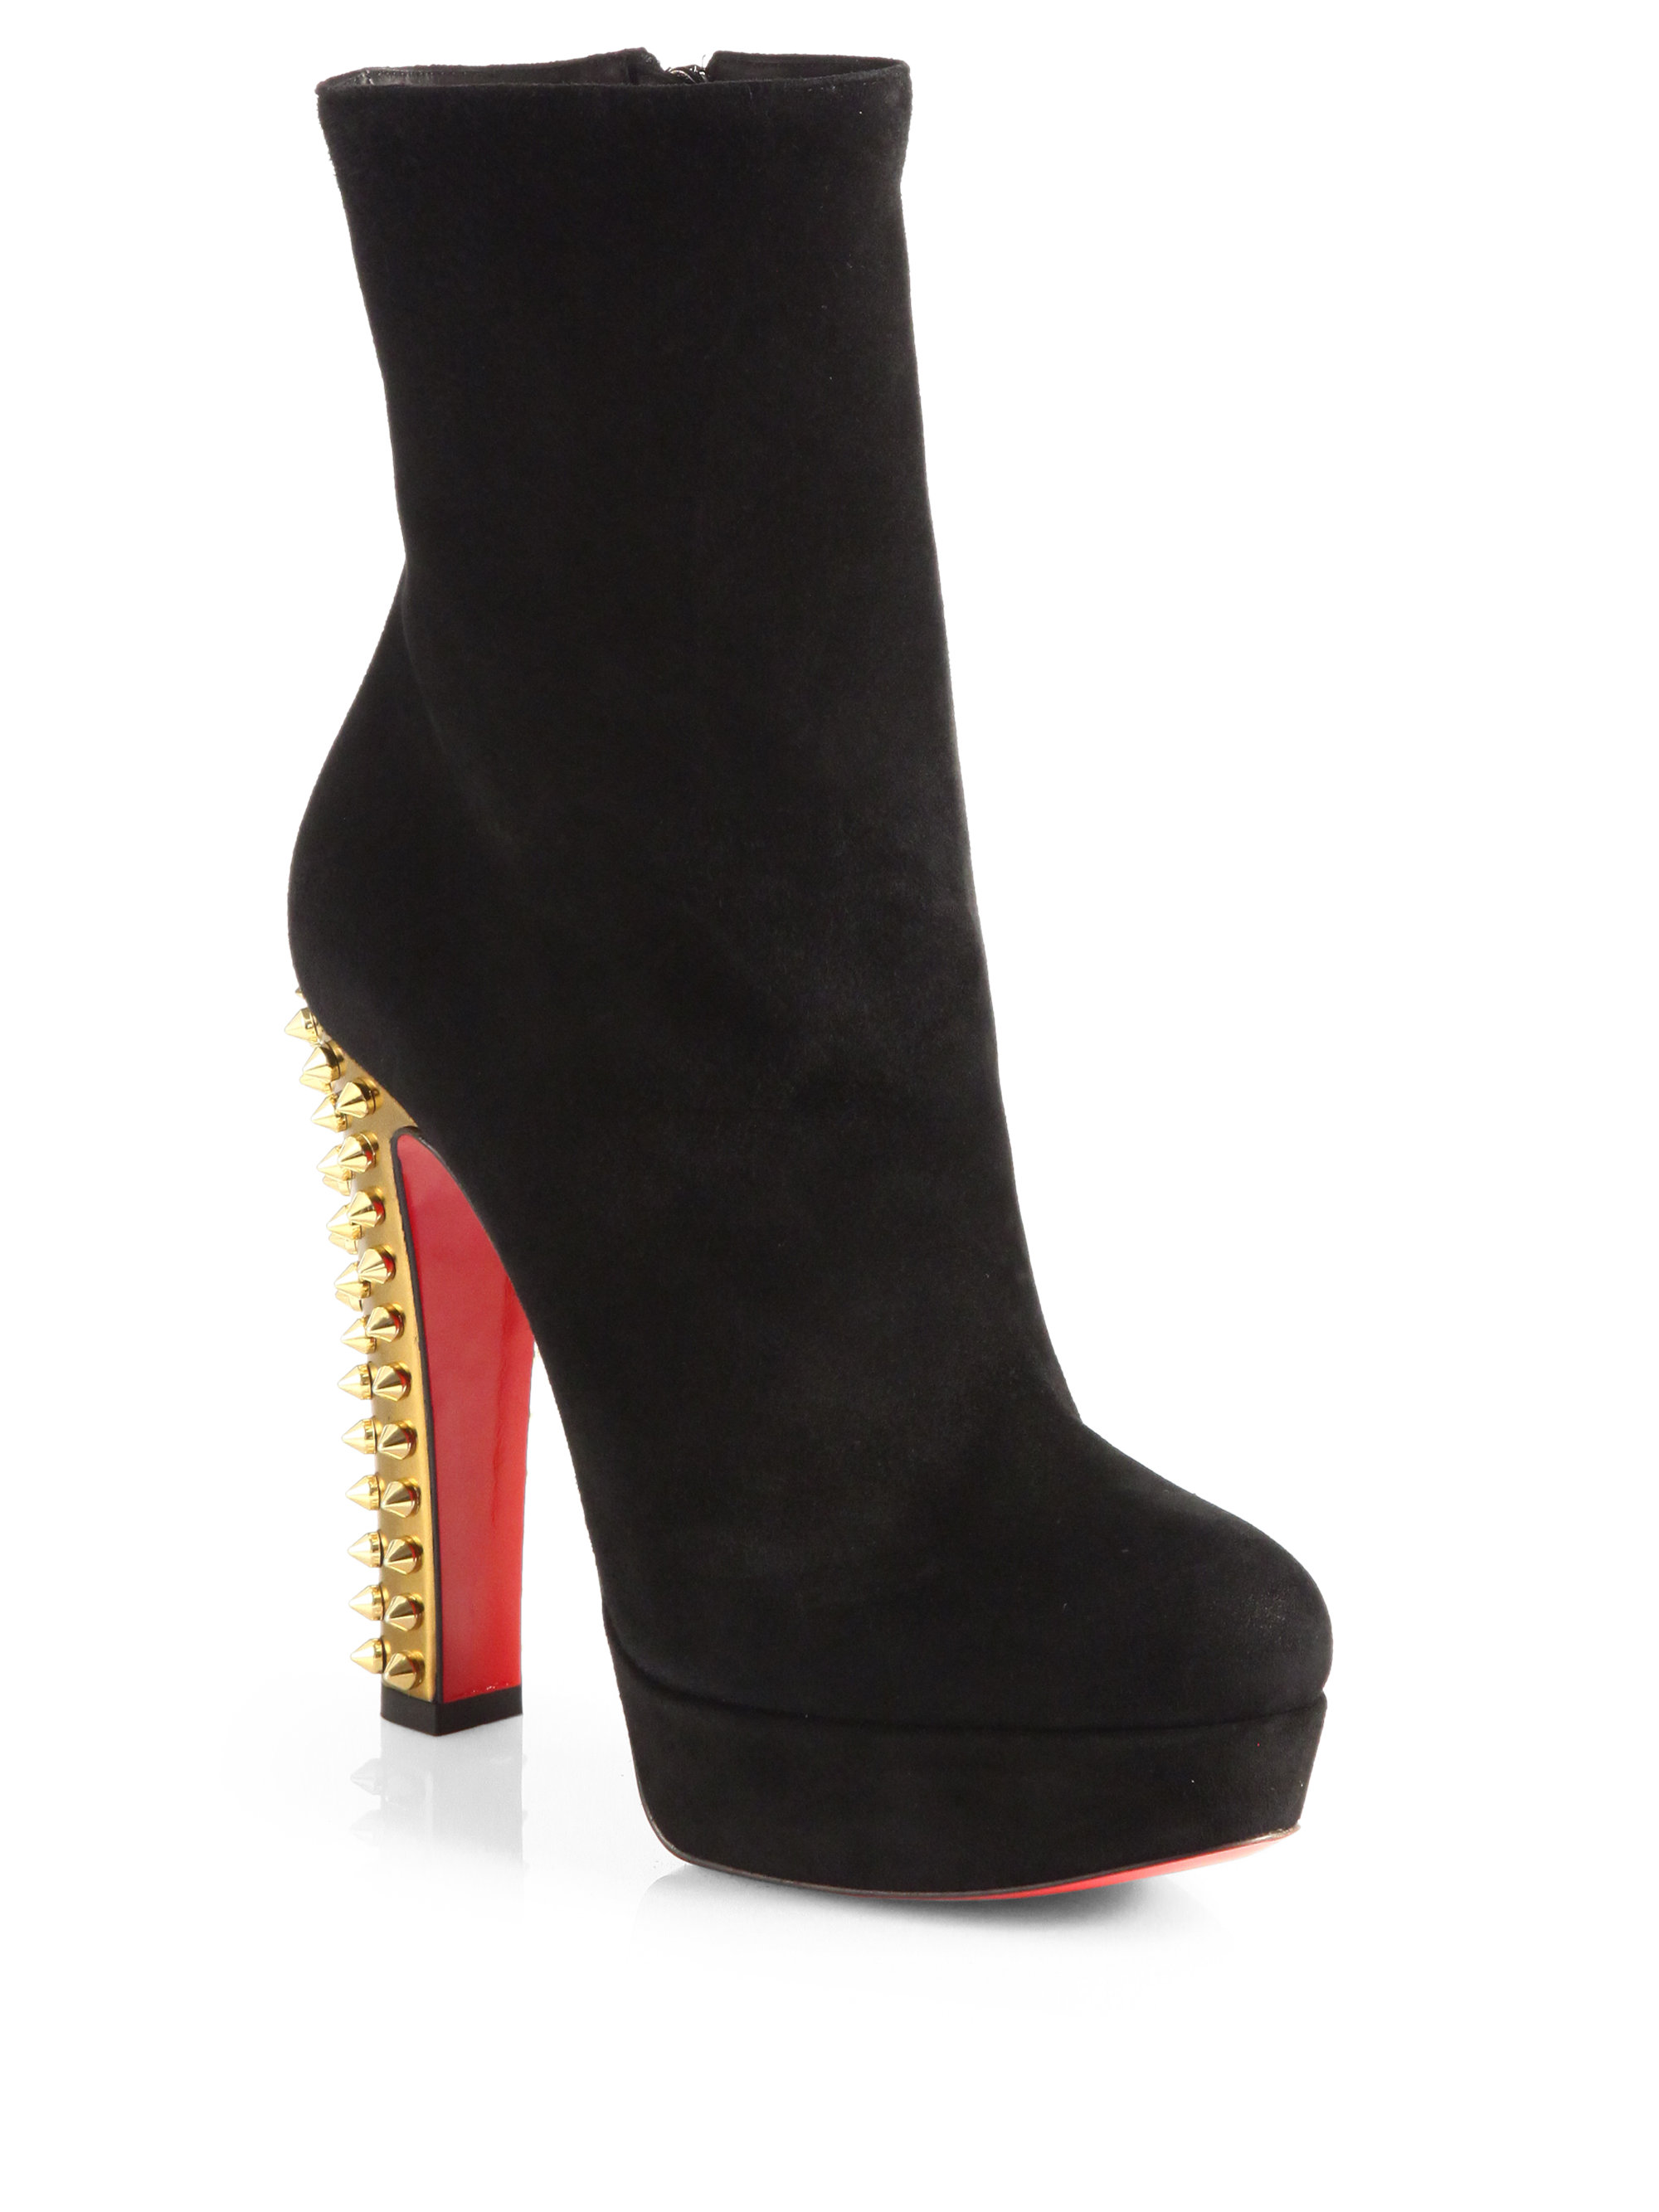 Christian Louboutin Taclou Suede Spiked Heel Midcalf Boots in (Black) - Lyst